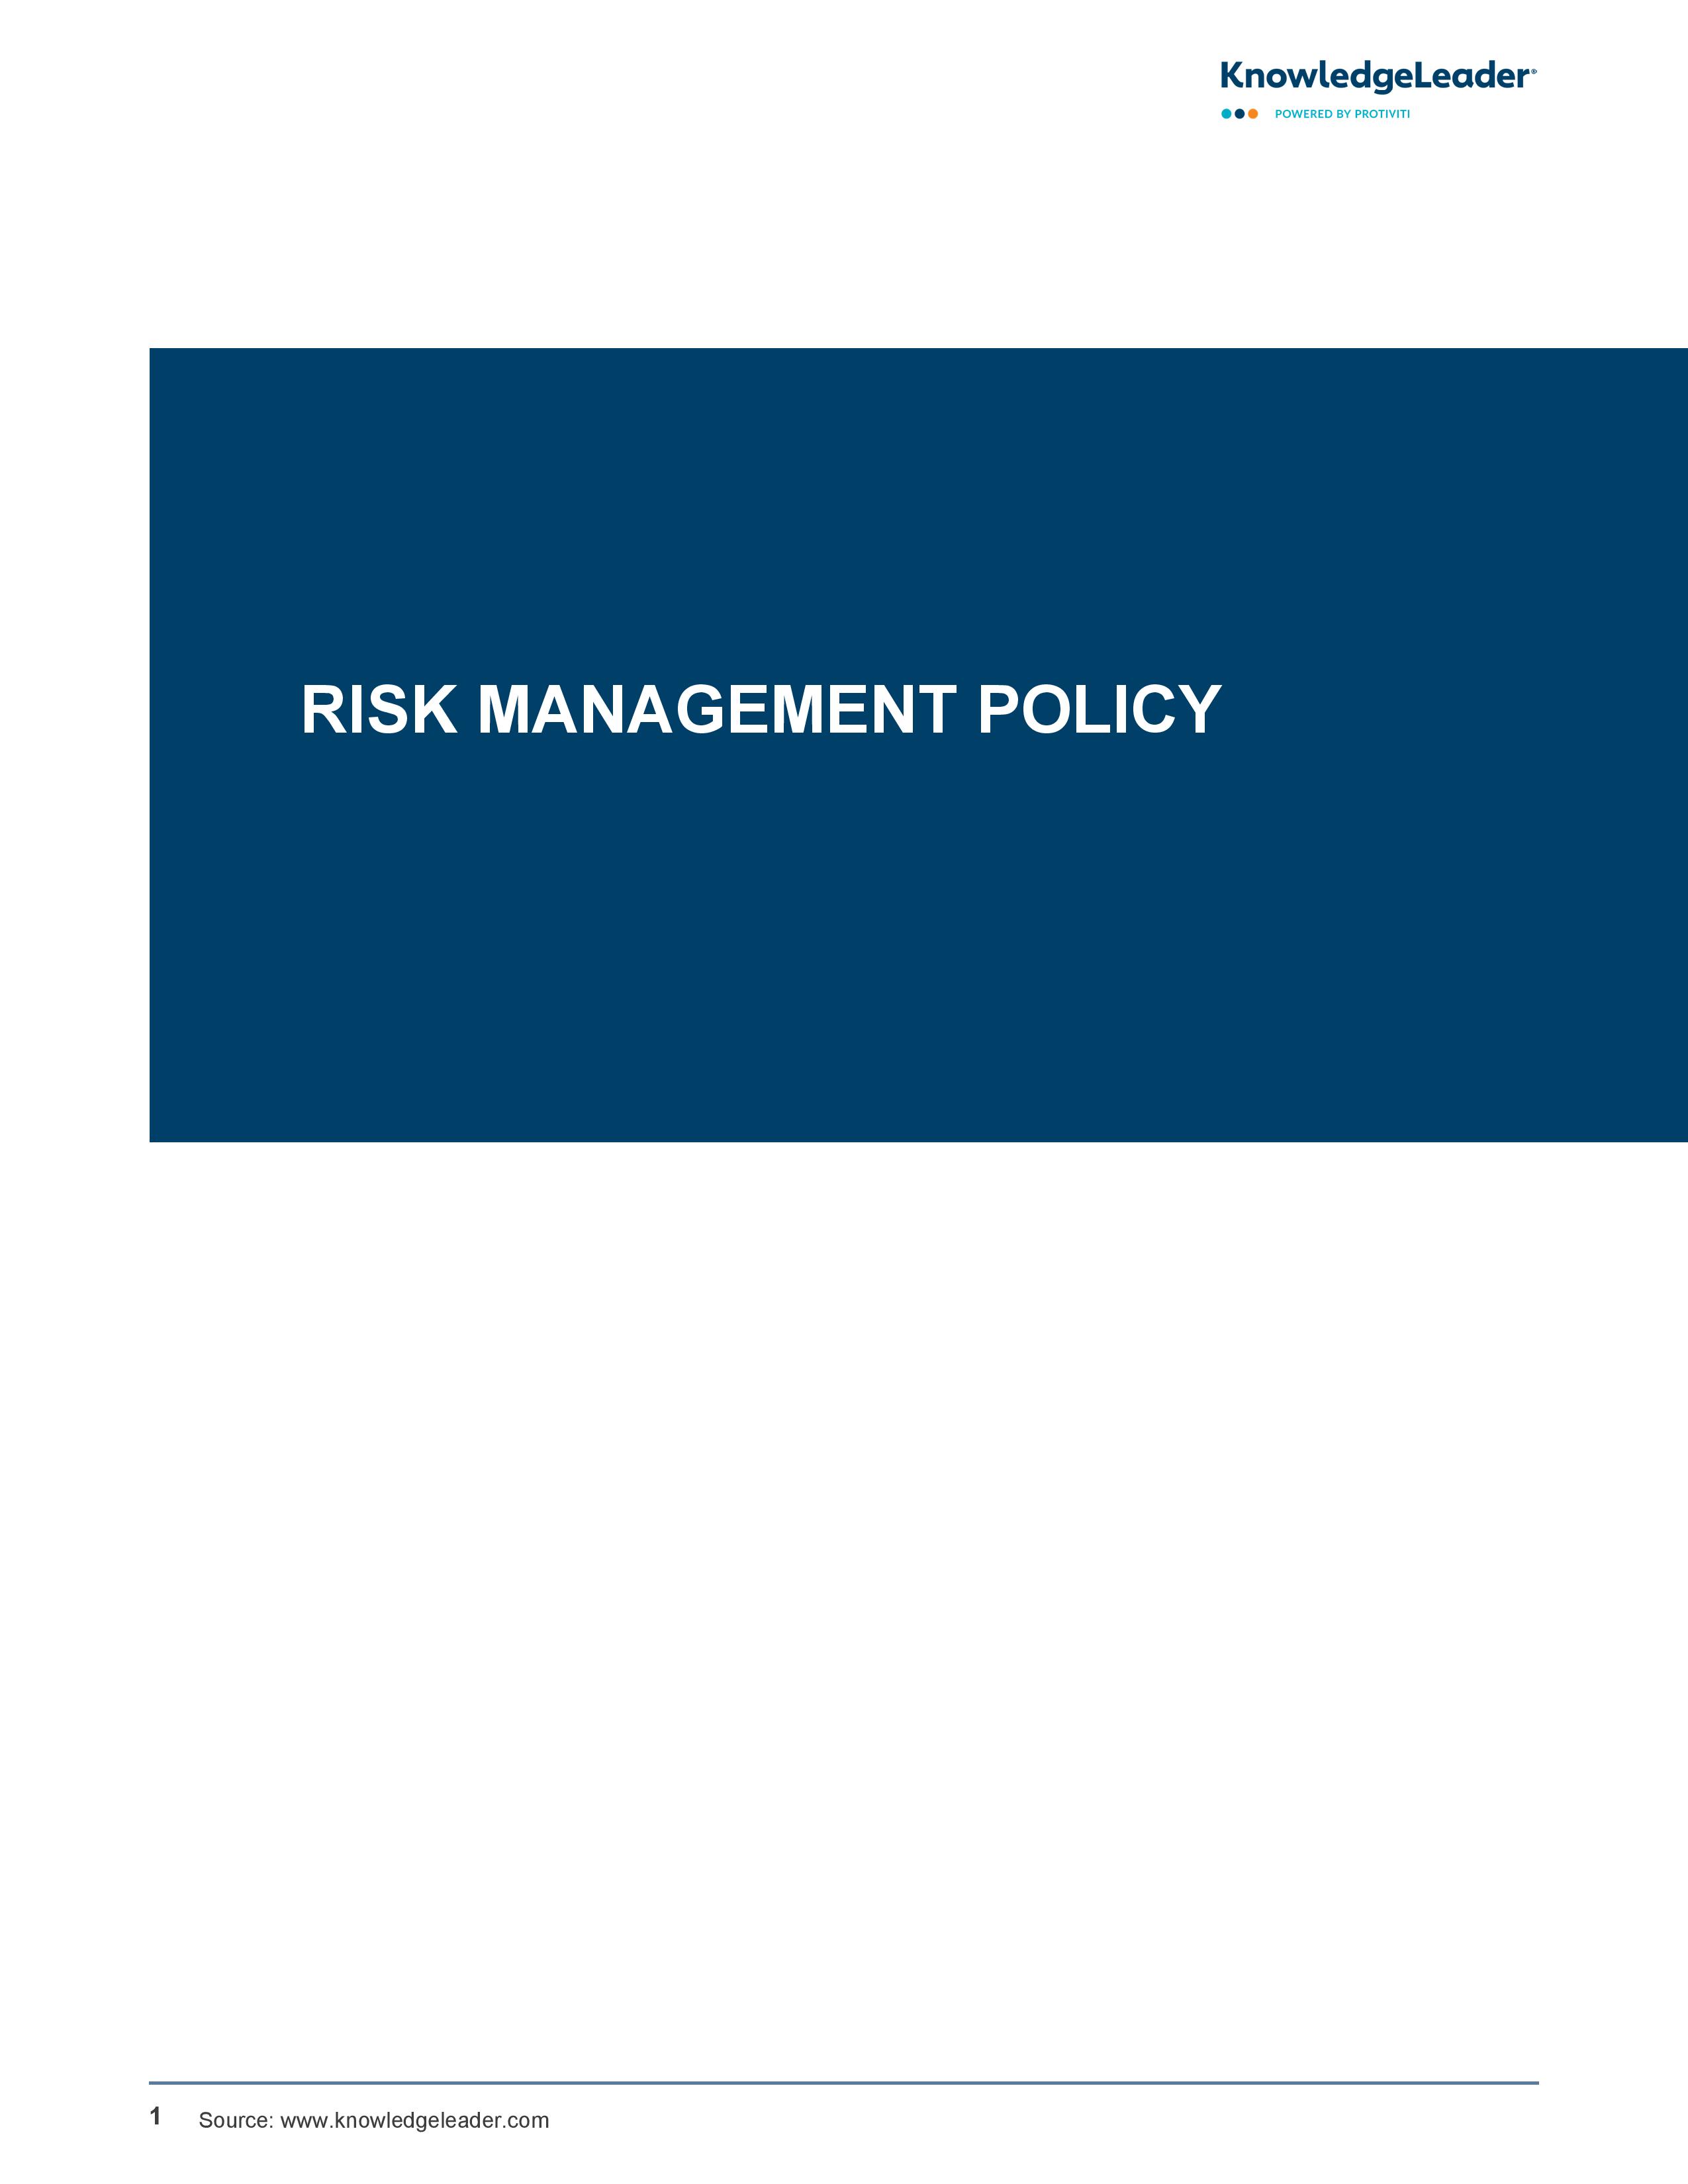 screenshot of the first page of Risk Management Policy